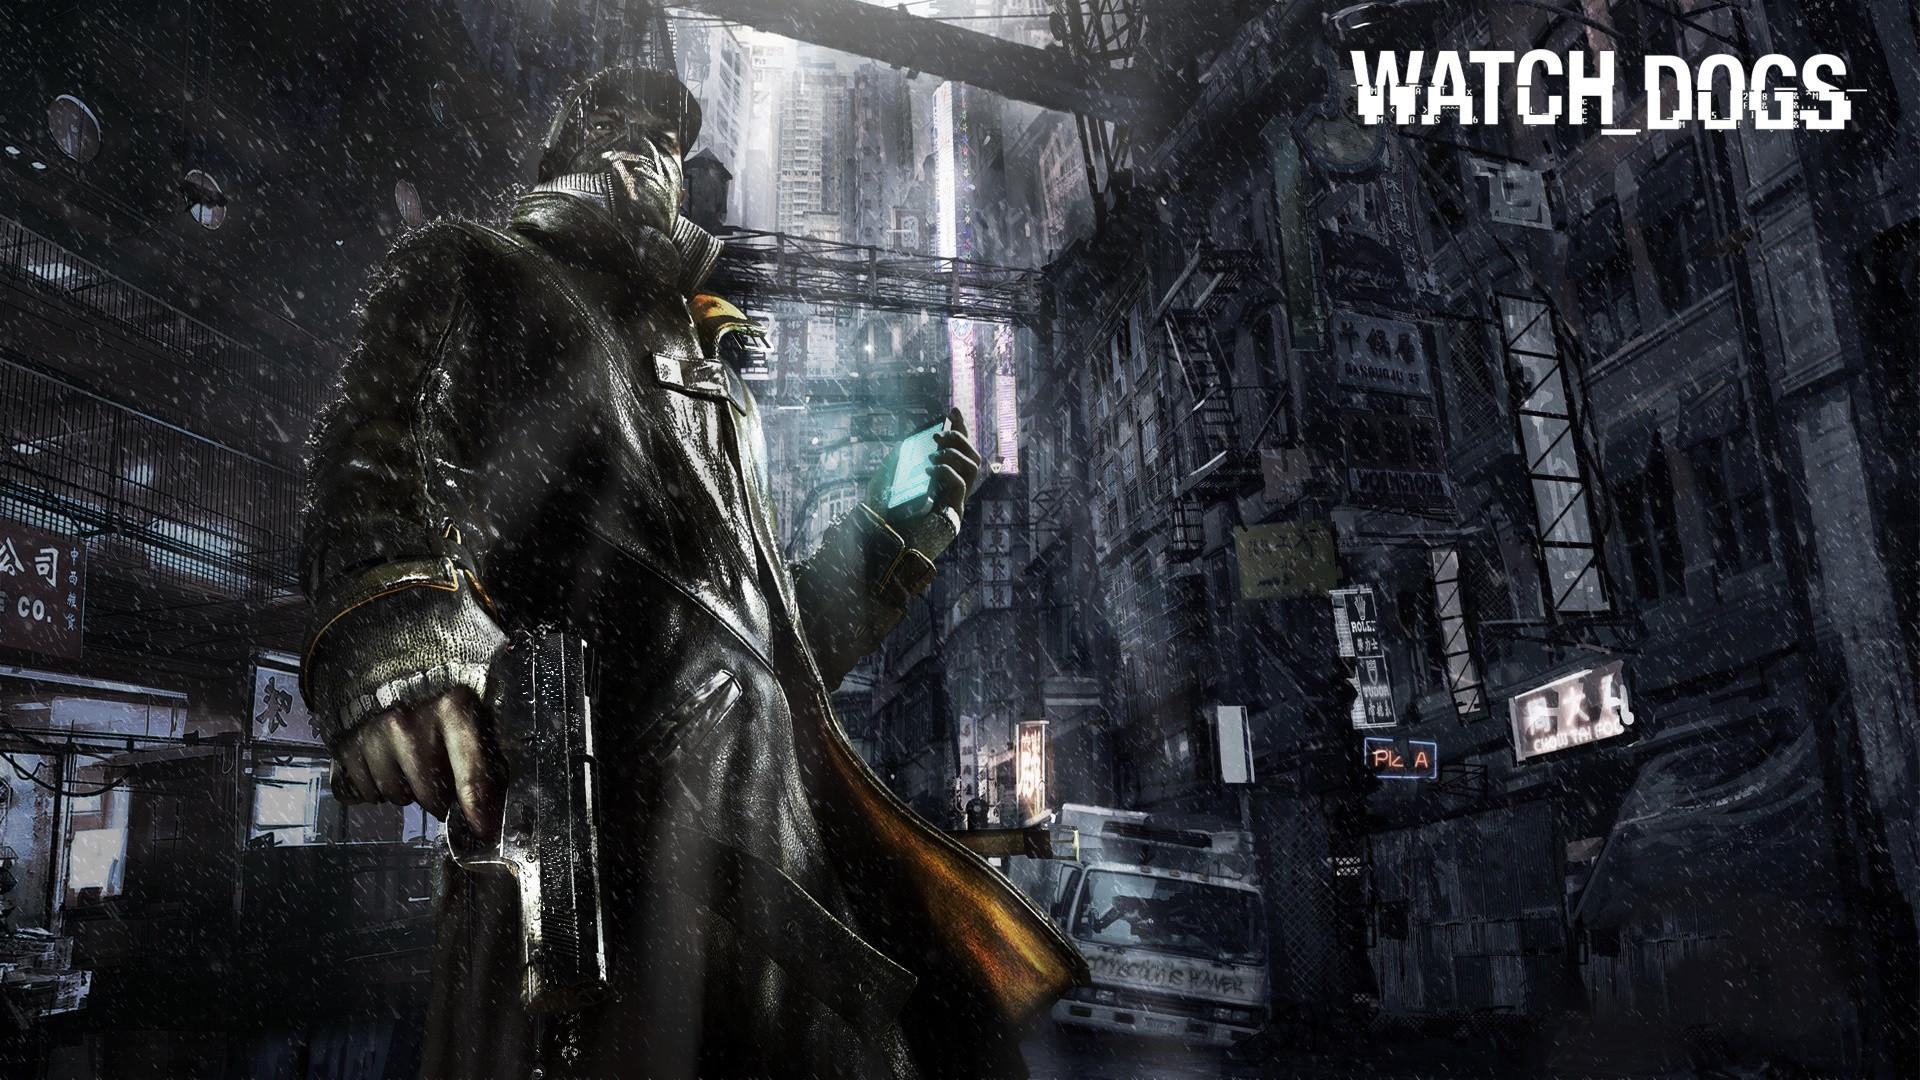 Watch Dogs Game Cool Hd Wallpapers 1080p | HD Wallpapers Range